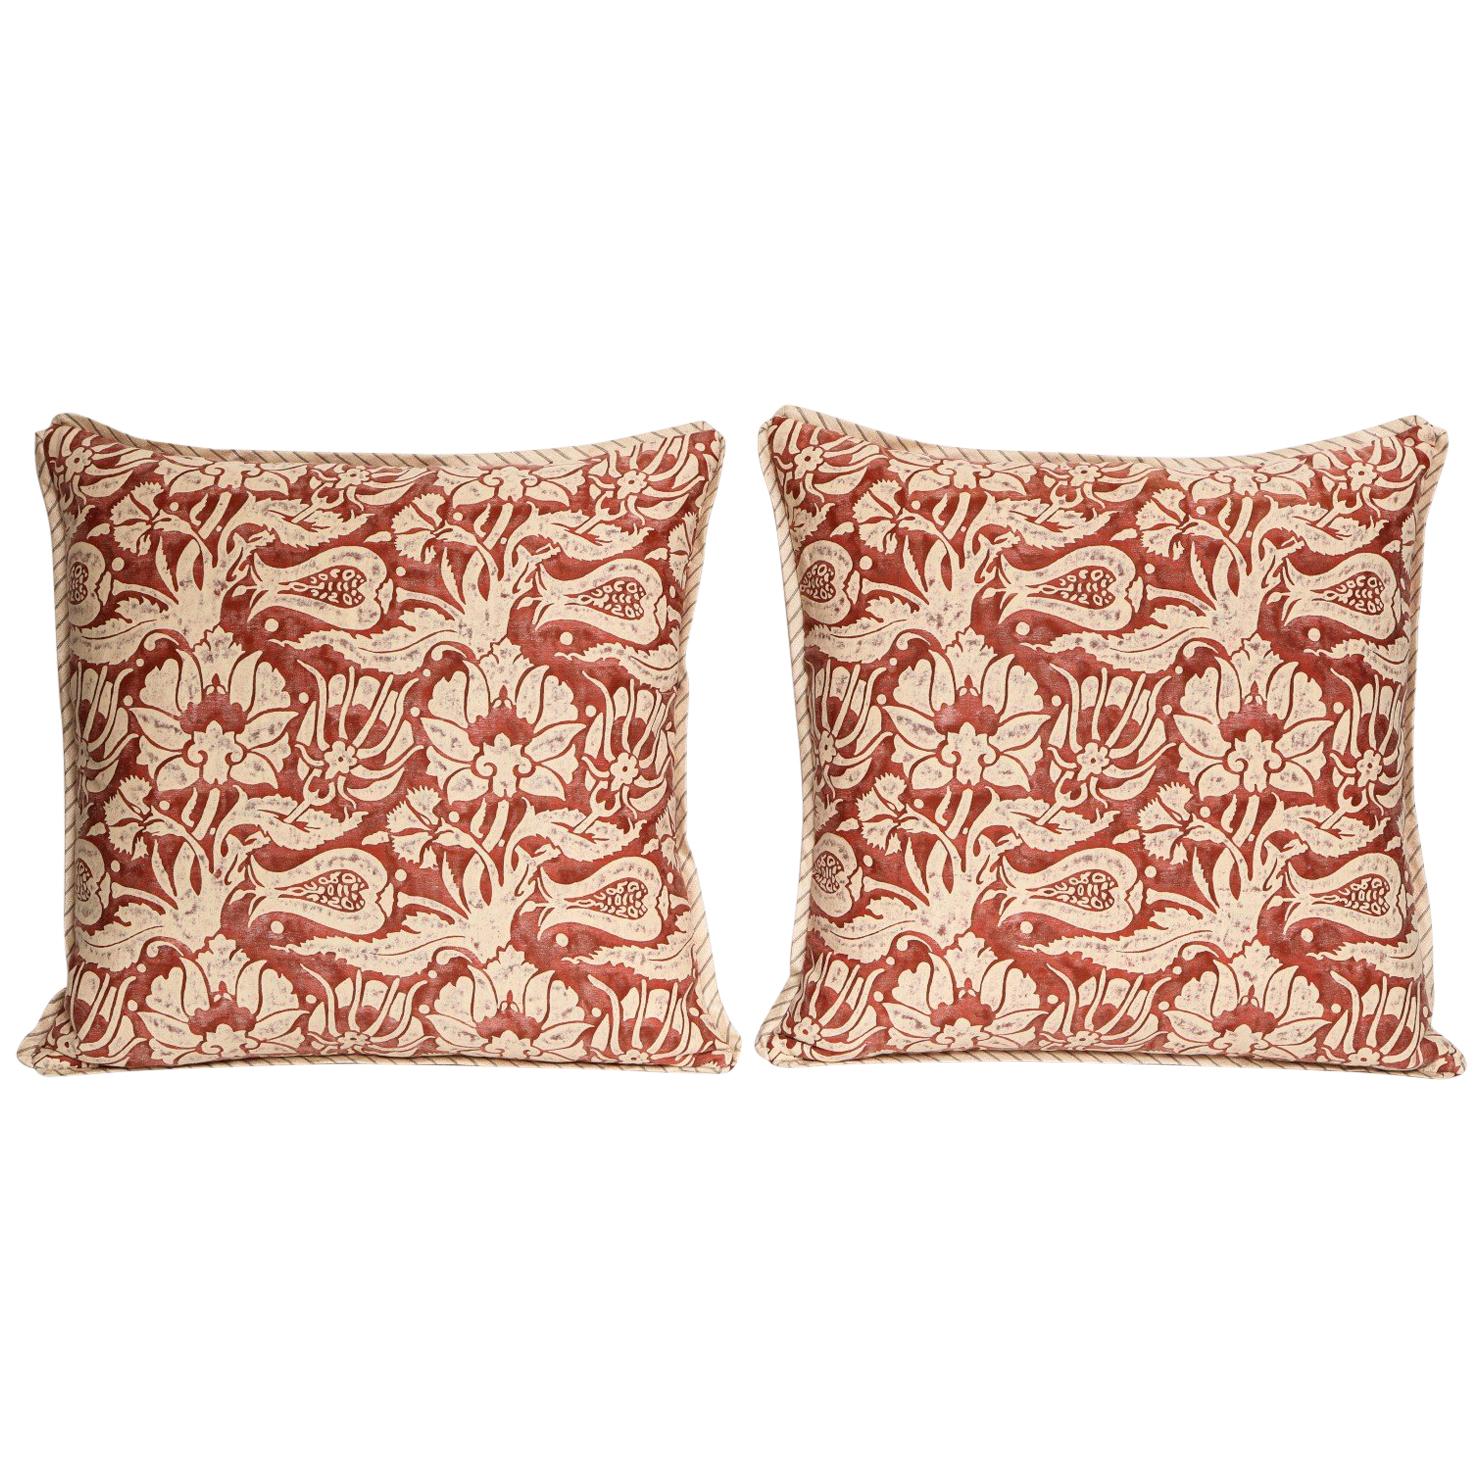 Pair of Fortuny Fabric Cushions in the Malagrana Pattern